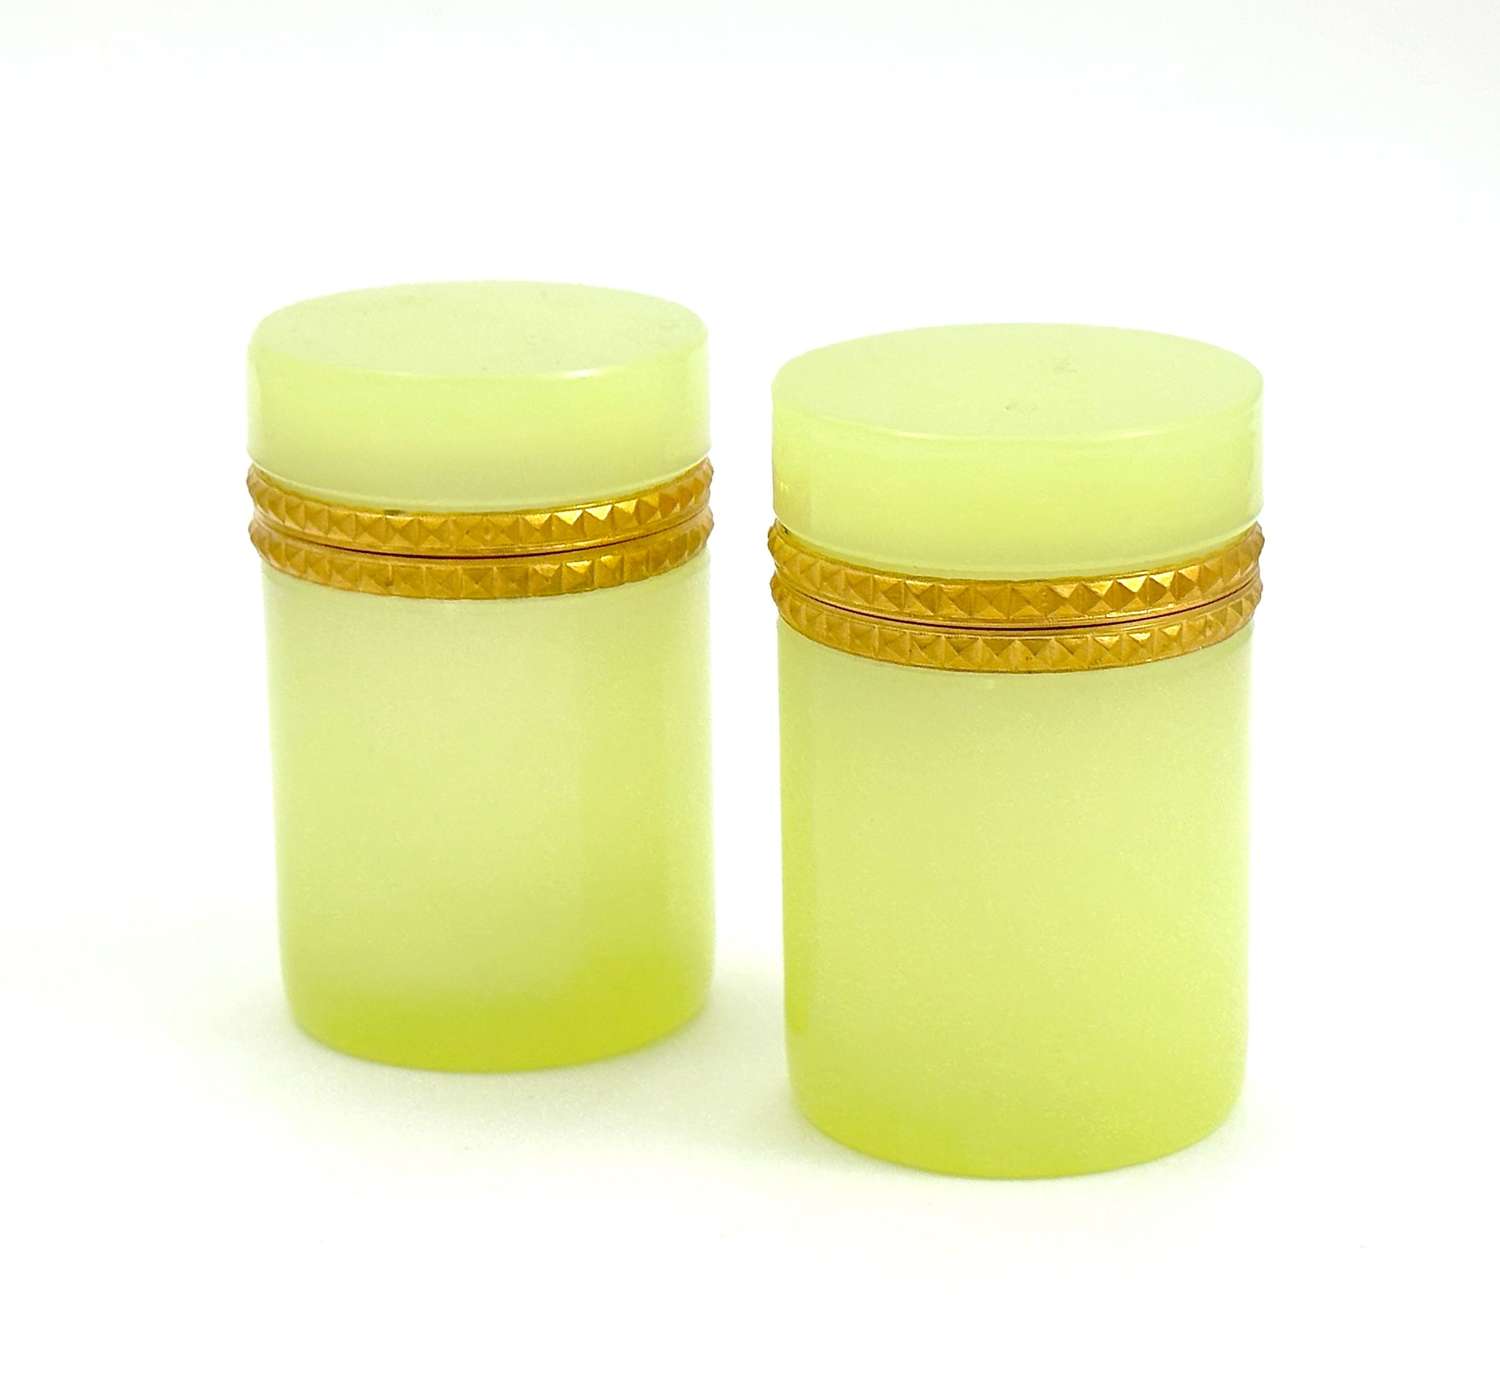 Pair of Antique Yellow Opaline Glass Cylindrical Caskets